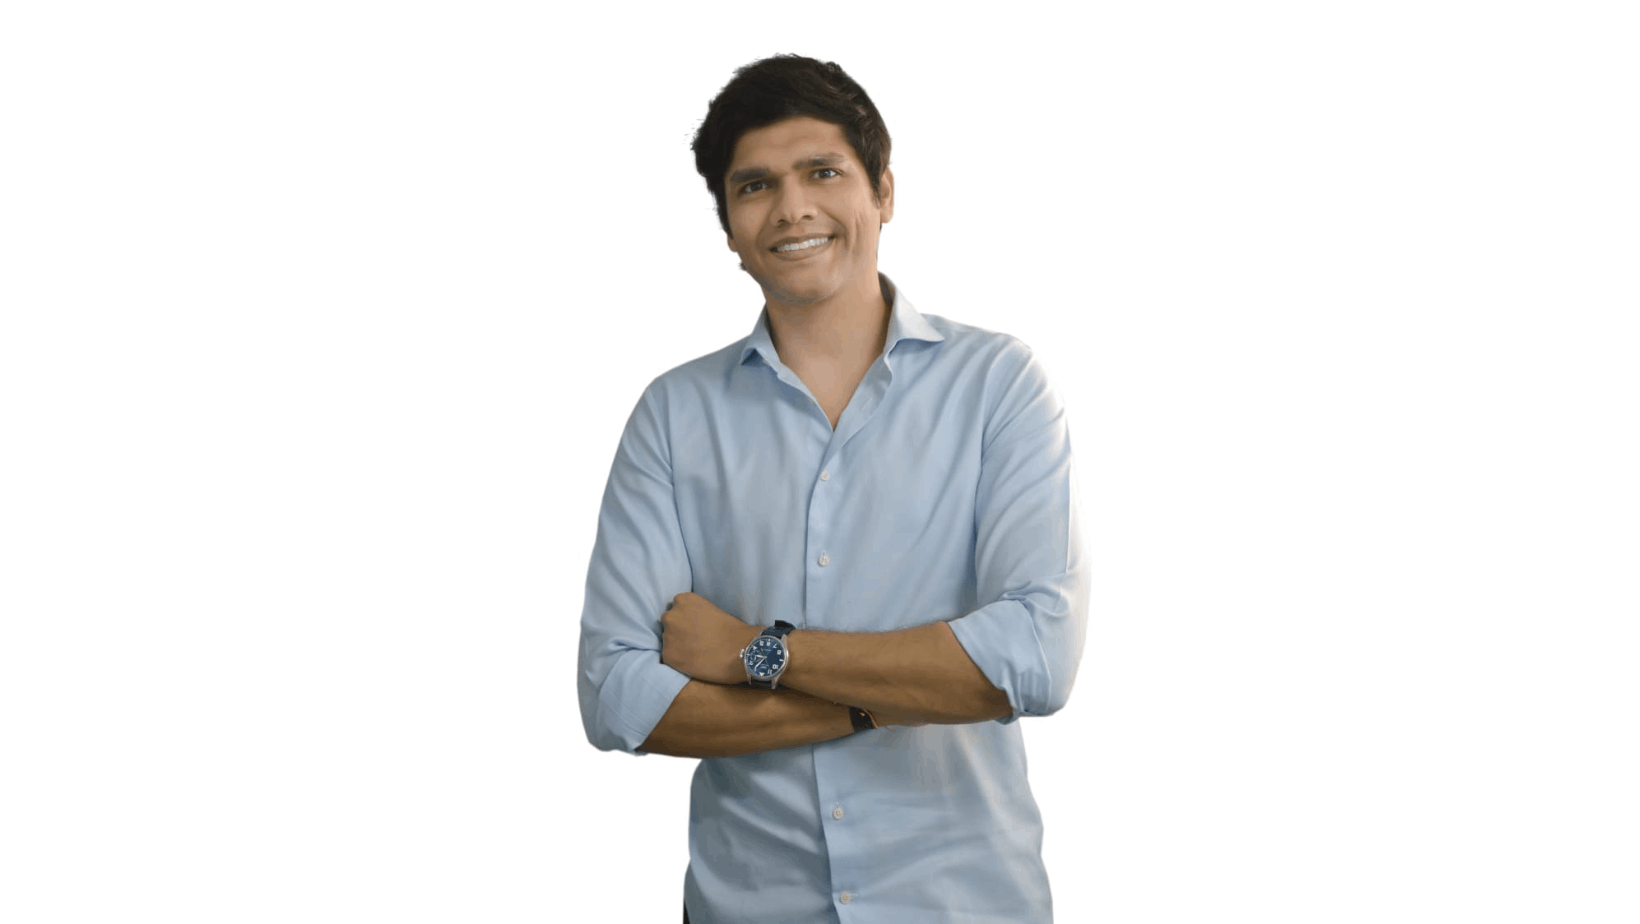 Varun Poddar, CEO of VOX India - a ceiling, cladding, & surface solutions company